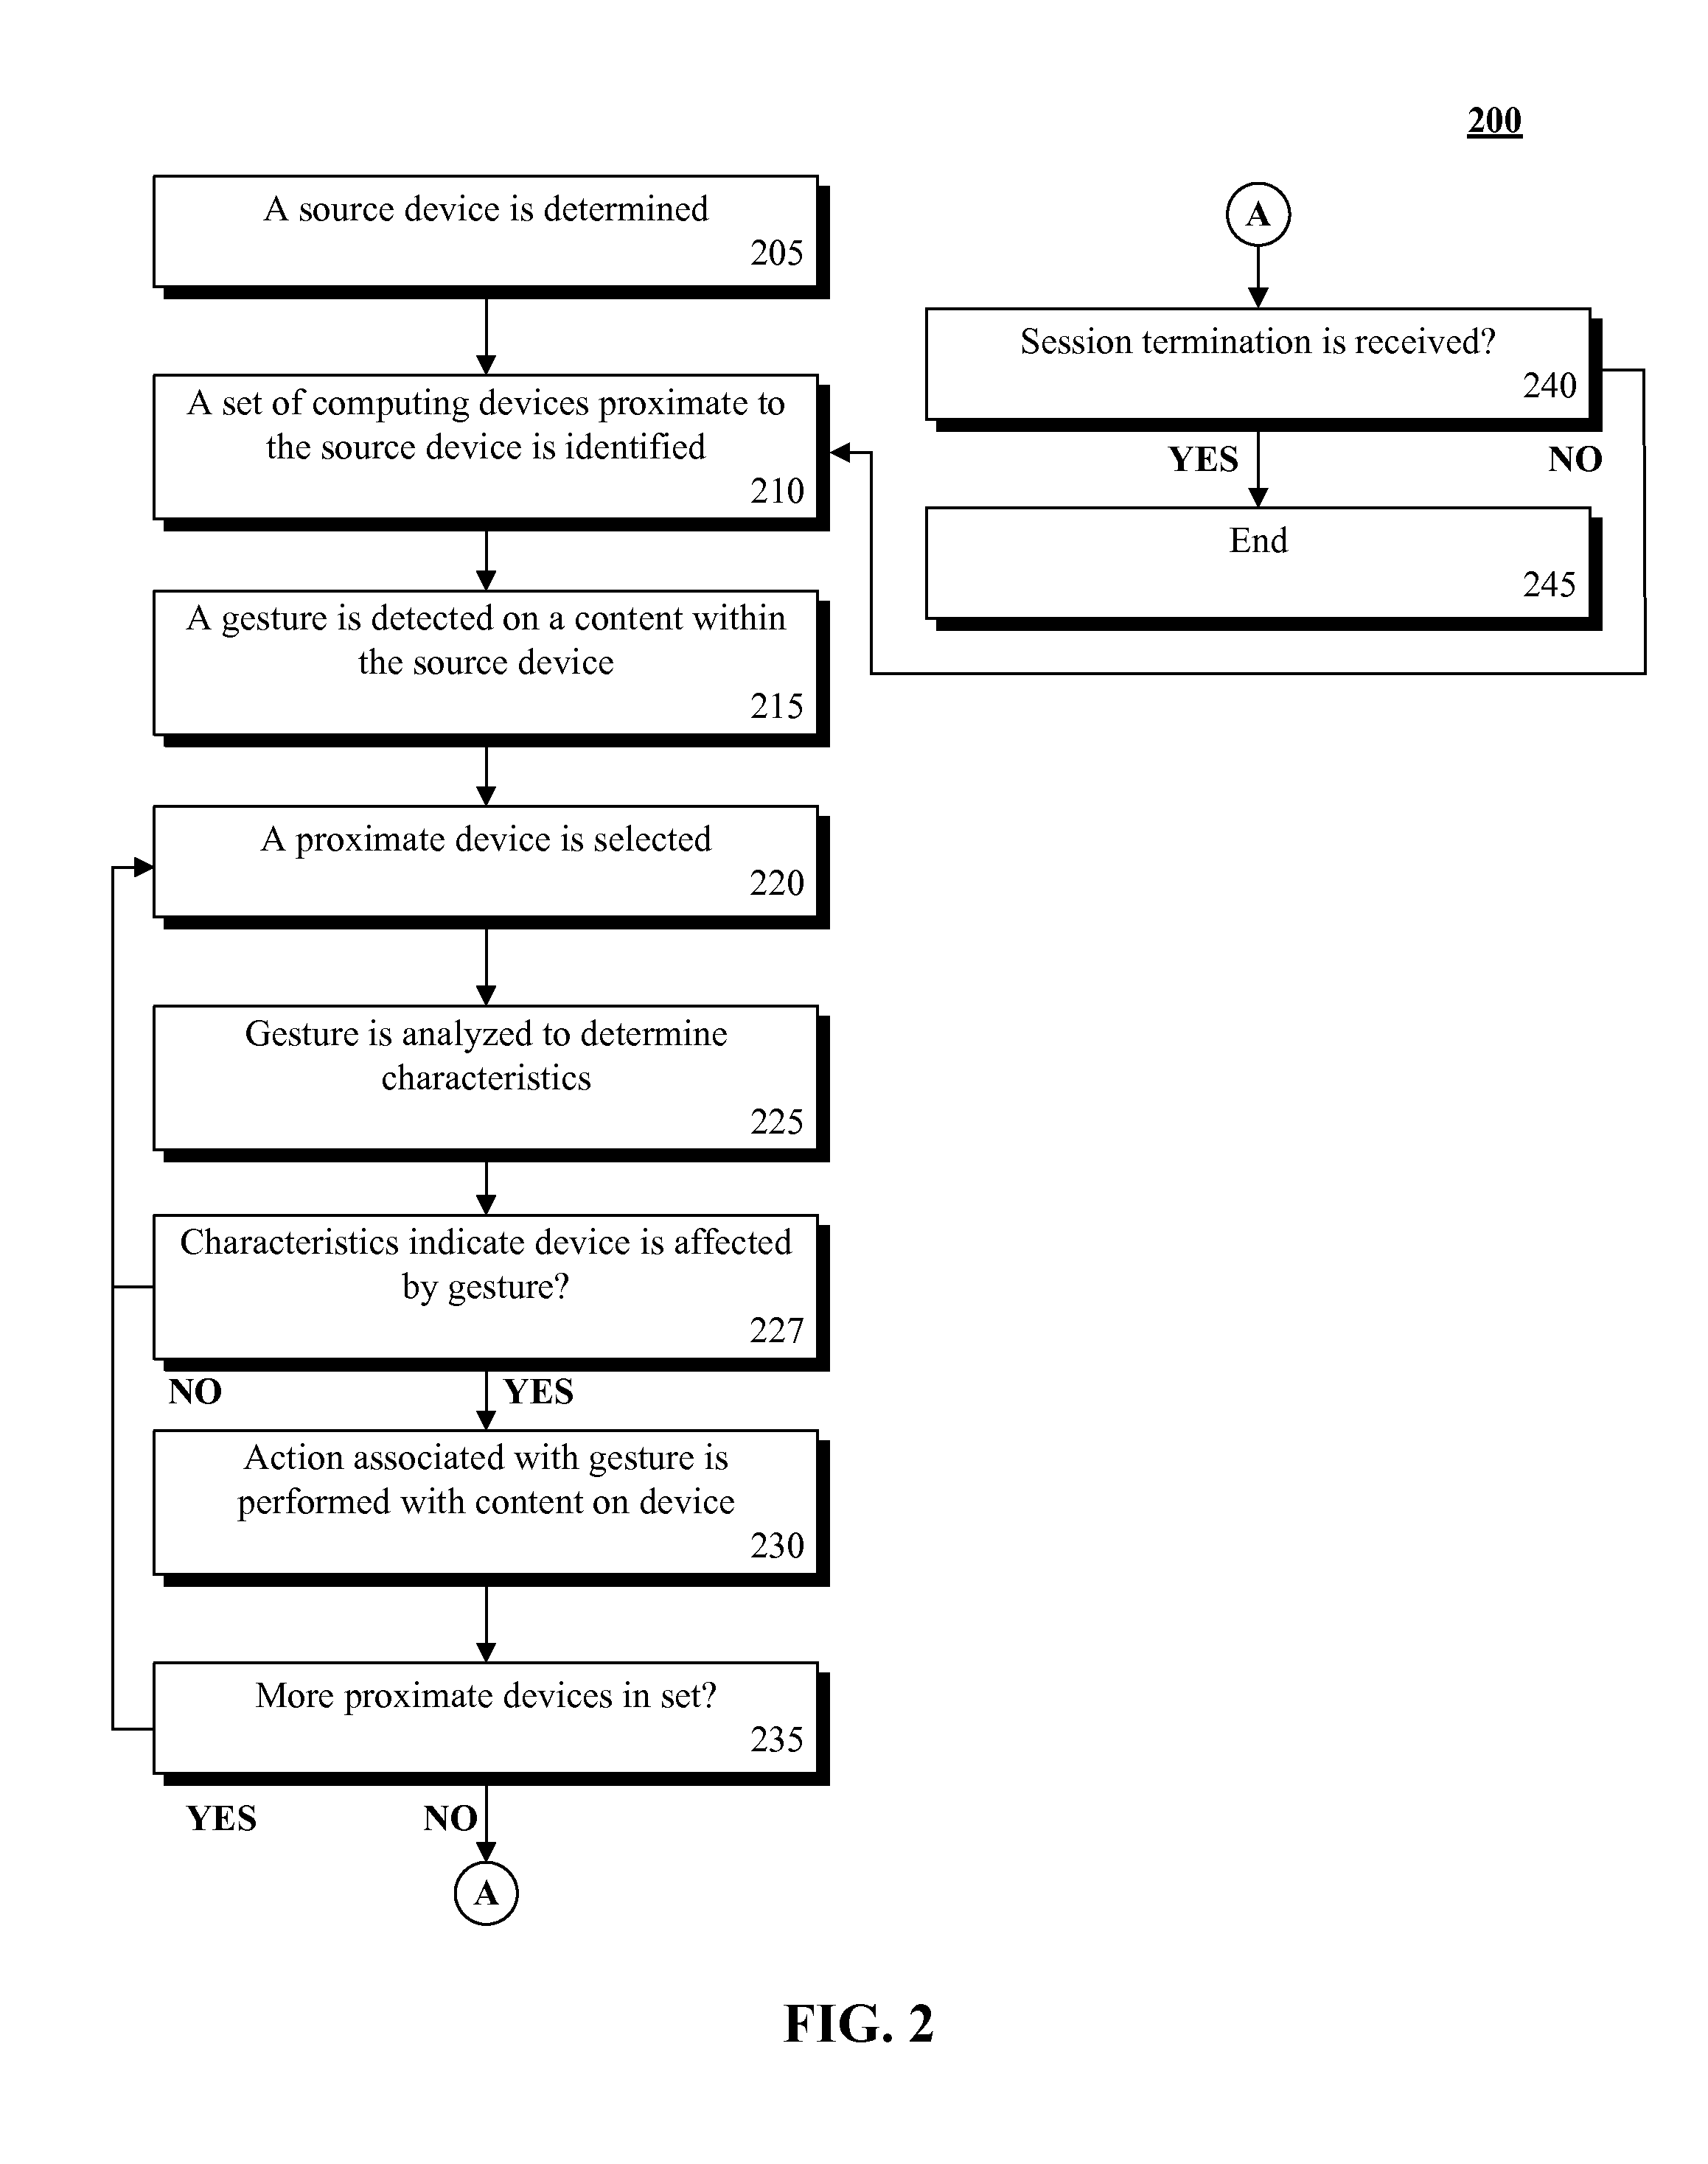 Enabling gesture driven content sharing between proximate computing devices